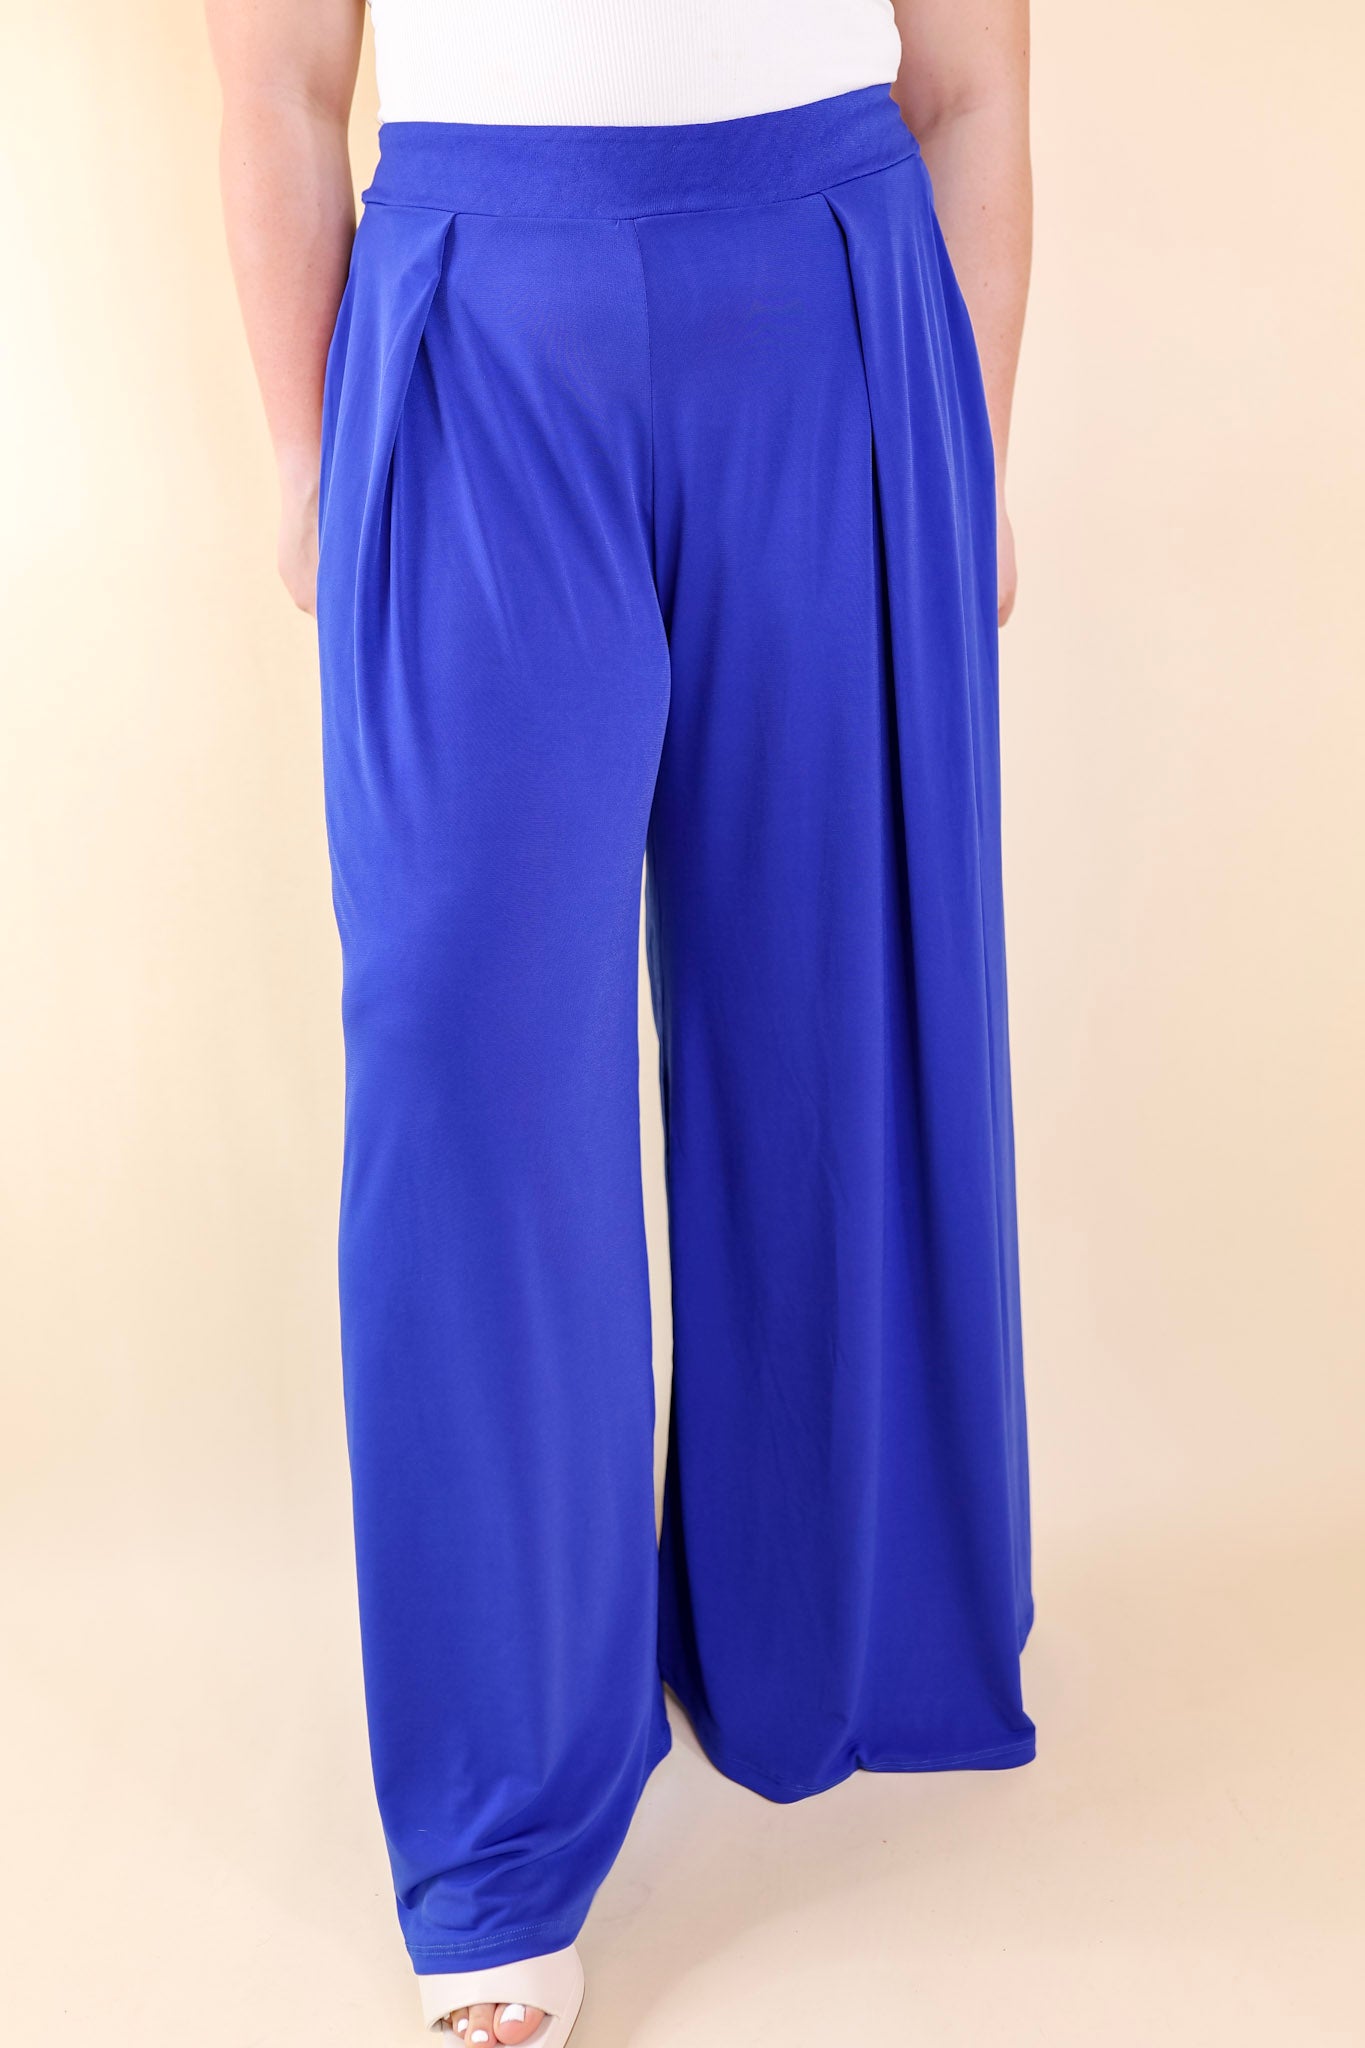 Plus Size | Urban Wonders Wide Leg Pants in Royal Blue - Giddy Up Glamour Boutique